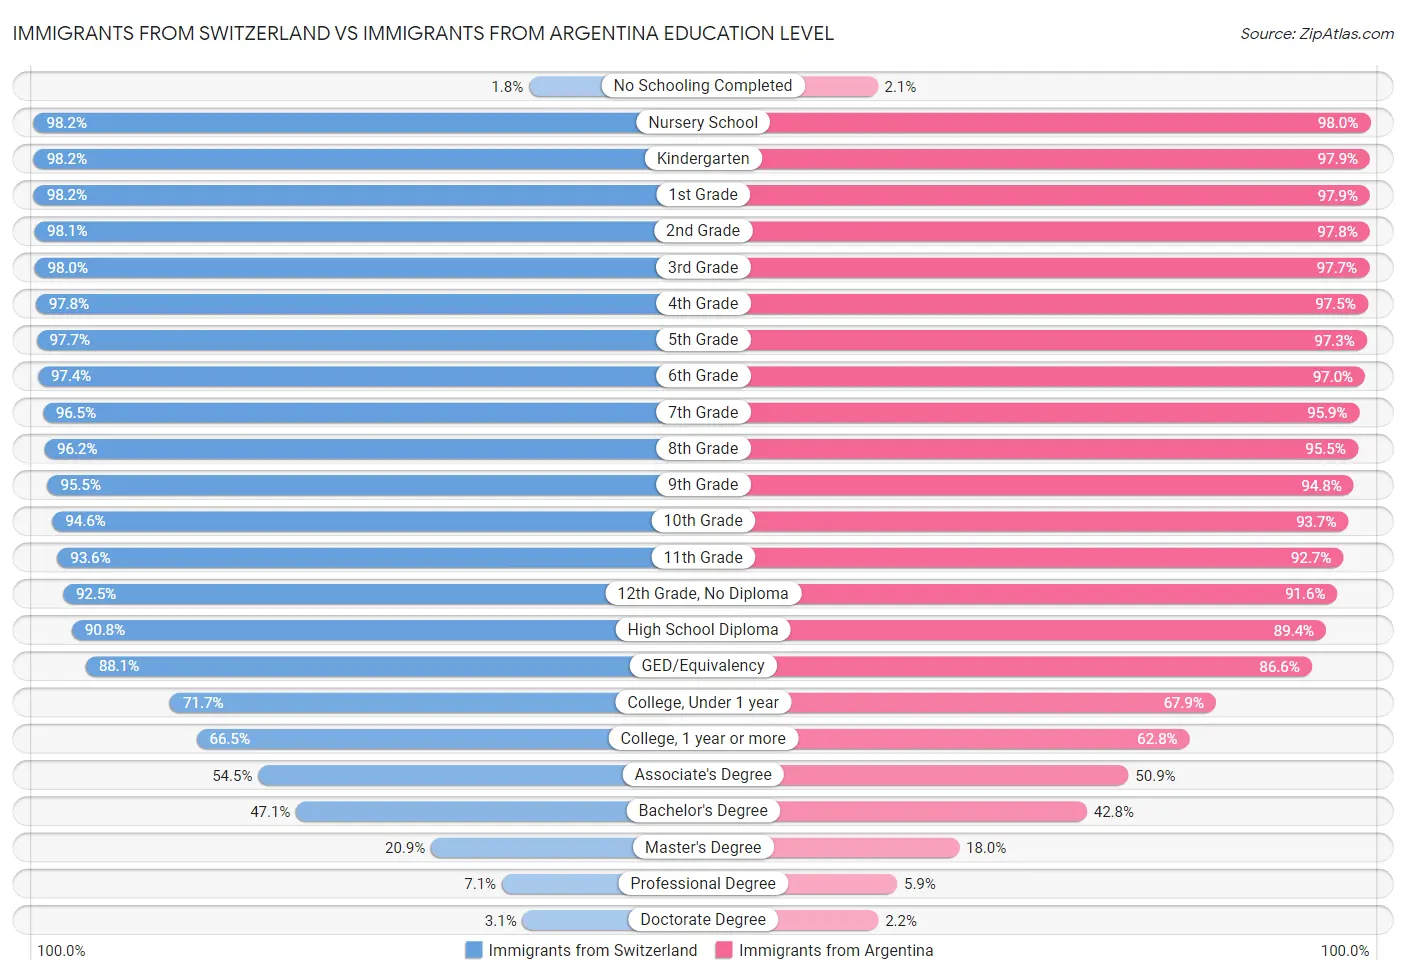 Immigrants from Switzerland vs Immigrants from Argentina Education Level